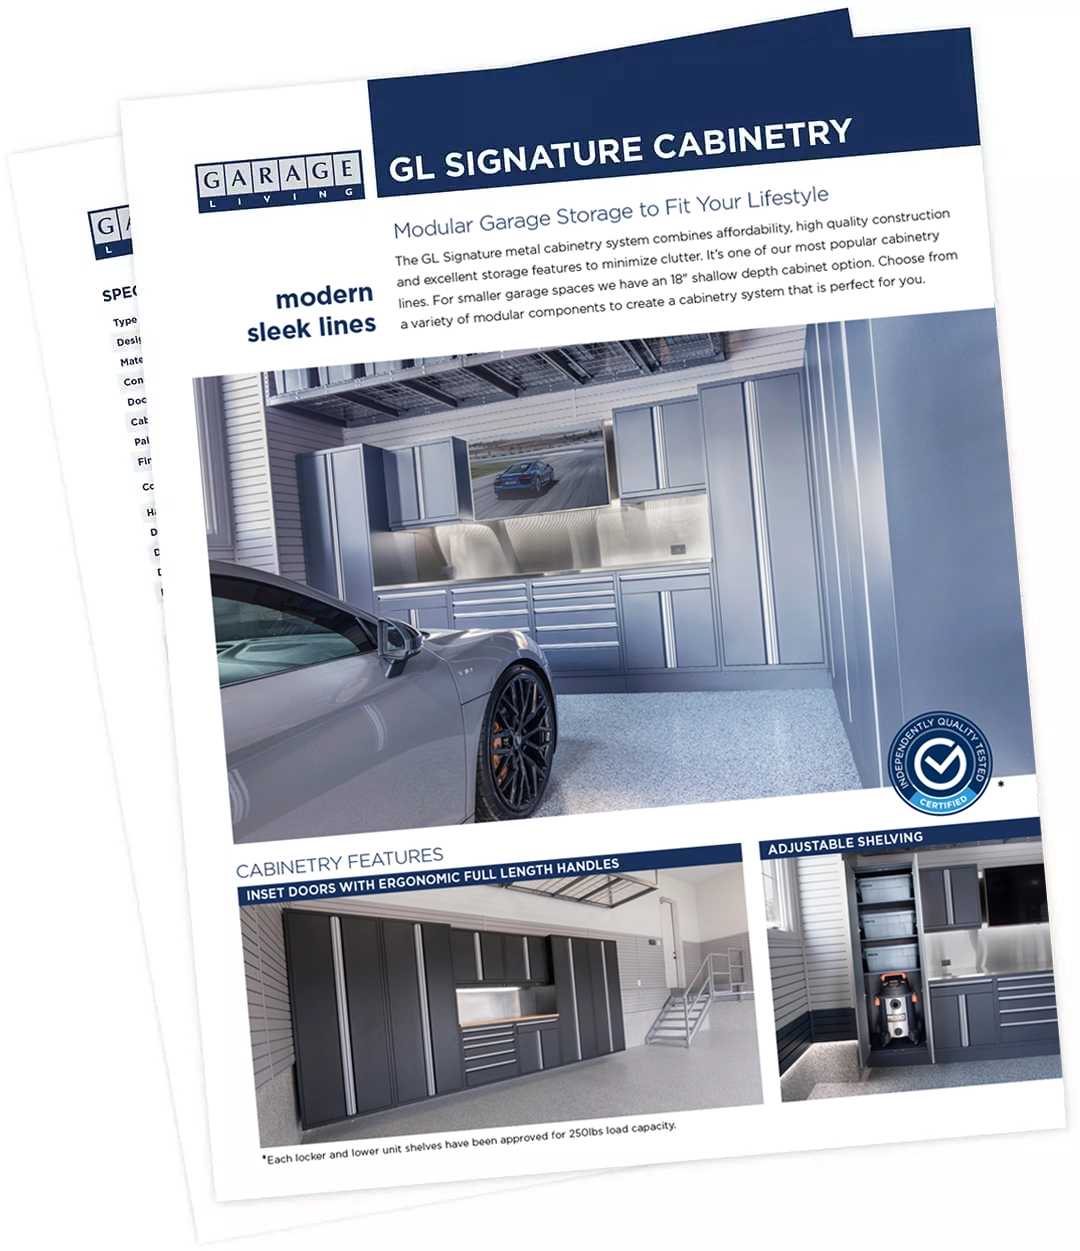 xgl-signature-cabinetry-042921.jpg.pagespeed.ic.xbne3RAPVH-1